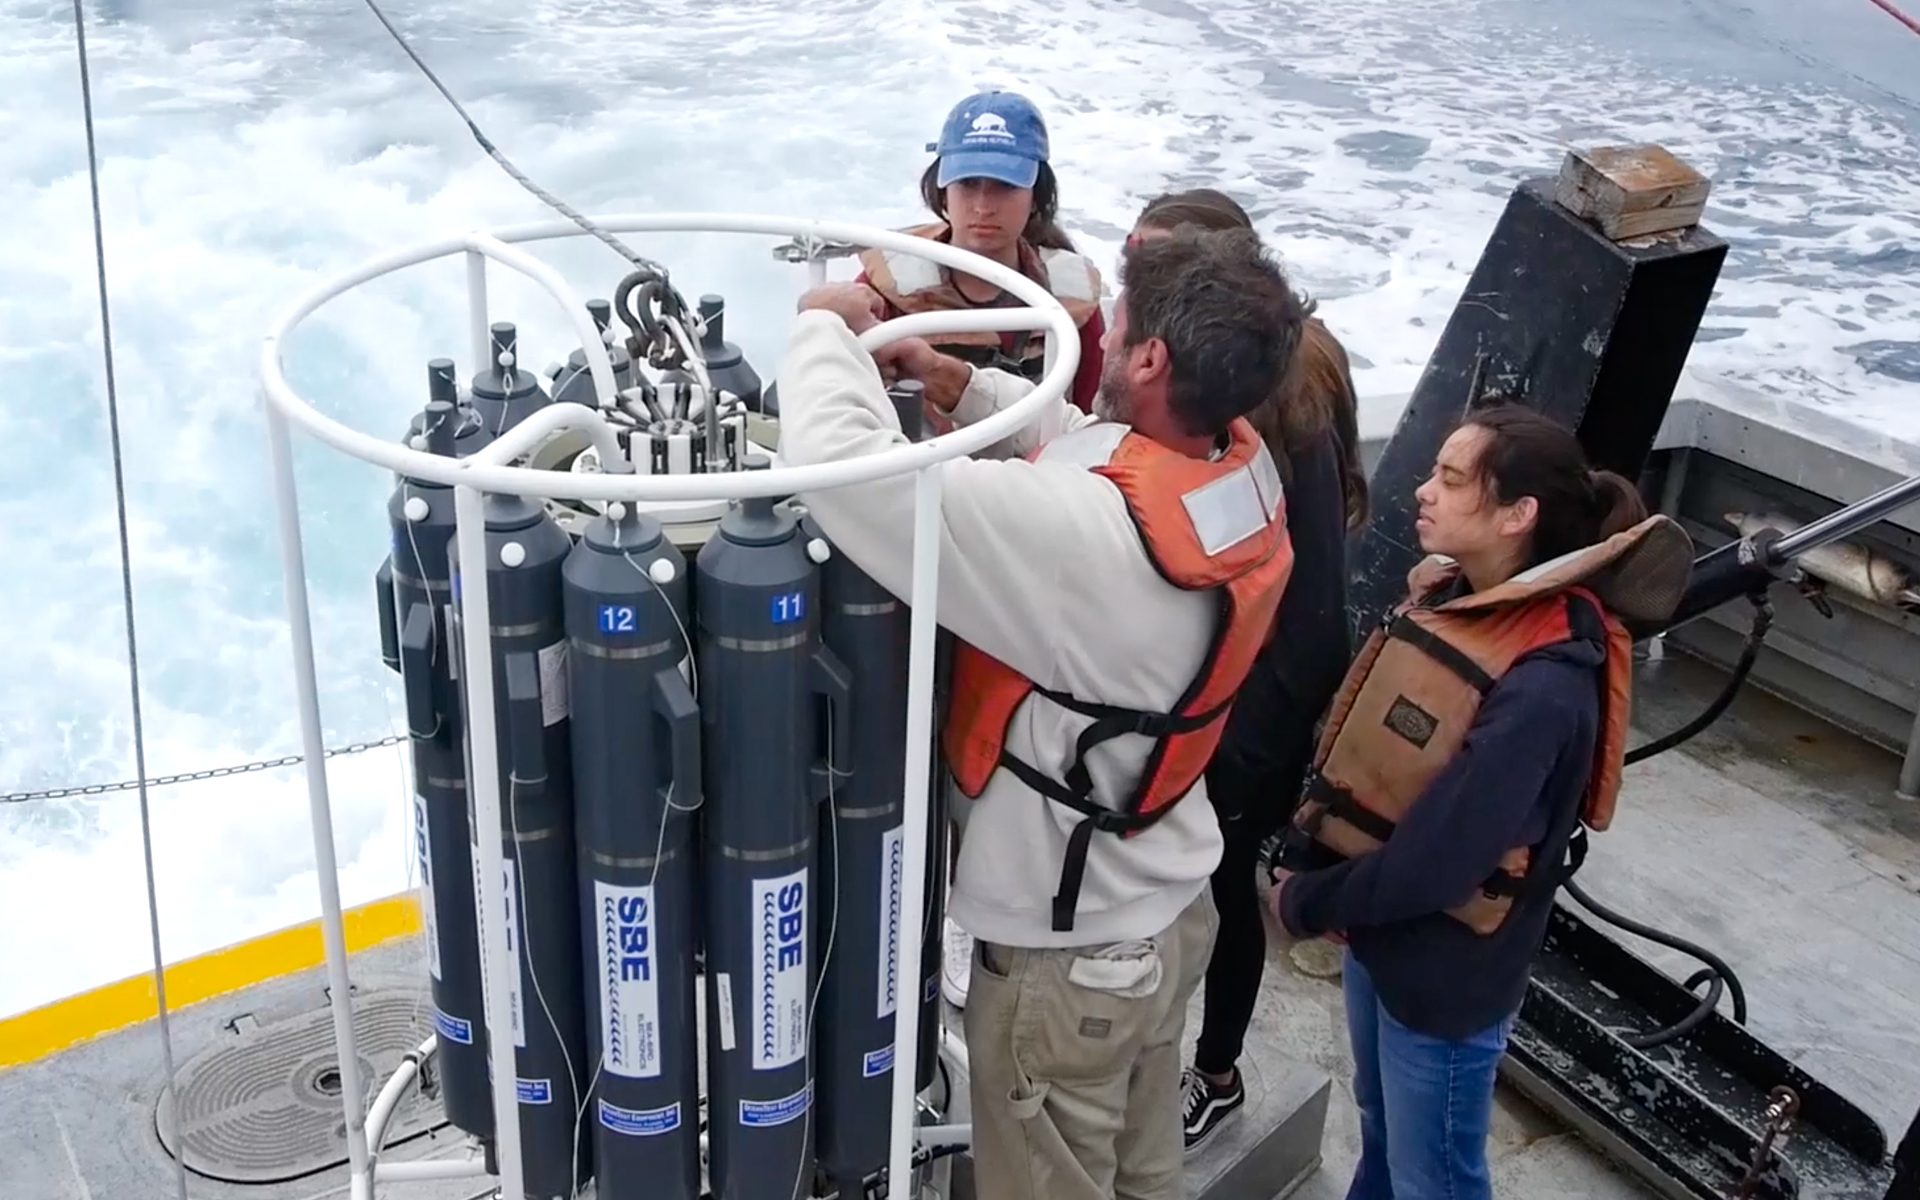 SPOT participants on a boat deploy the CTD rosette for water sampling